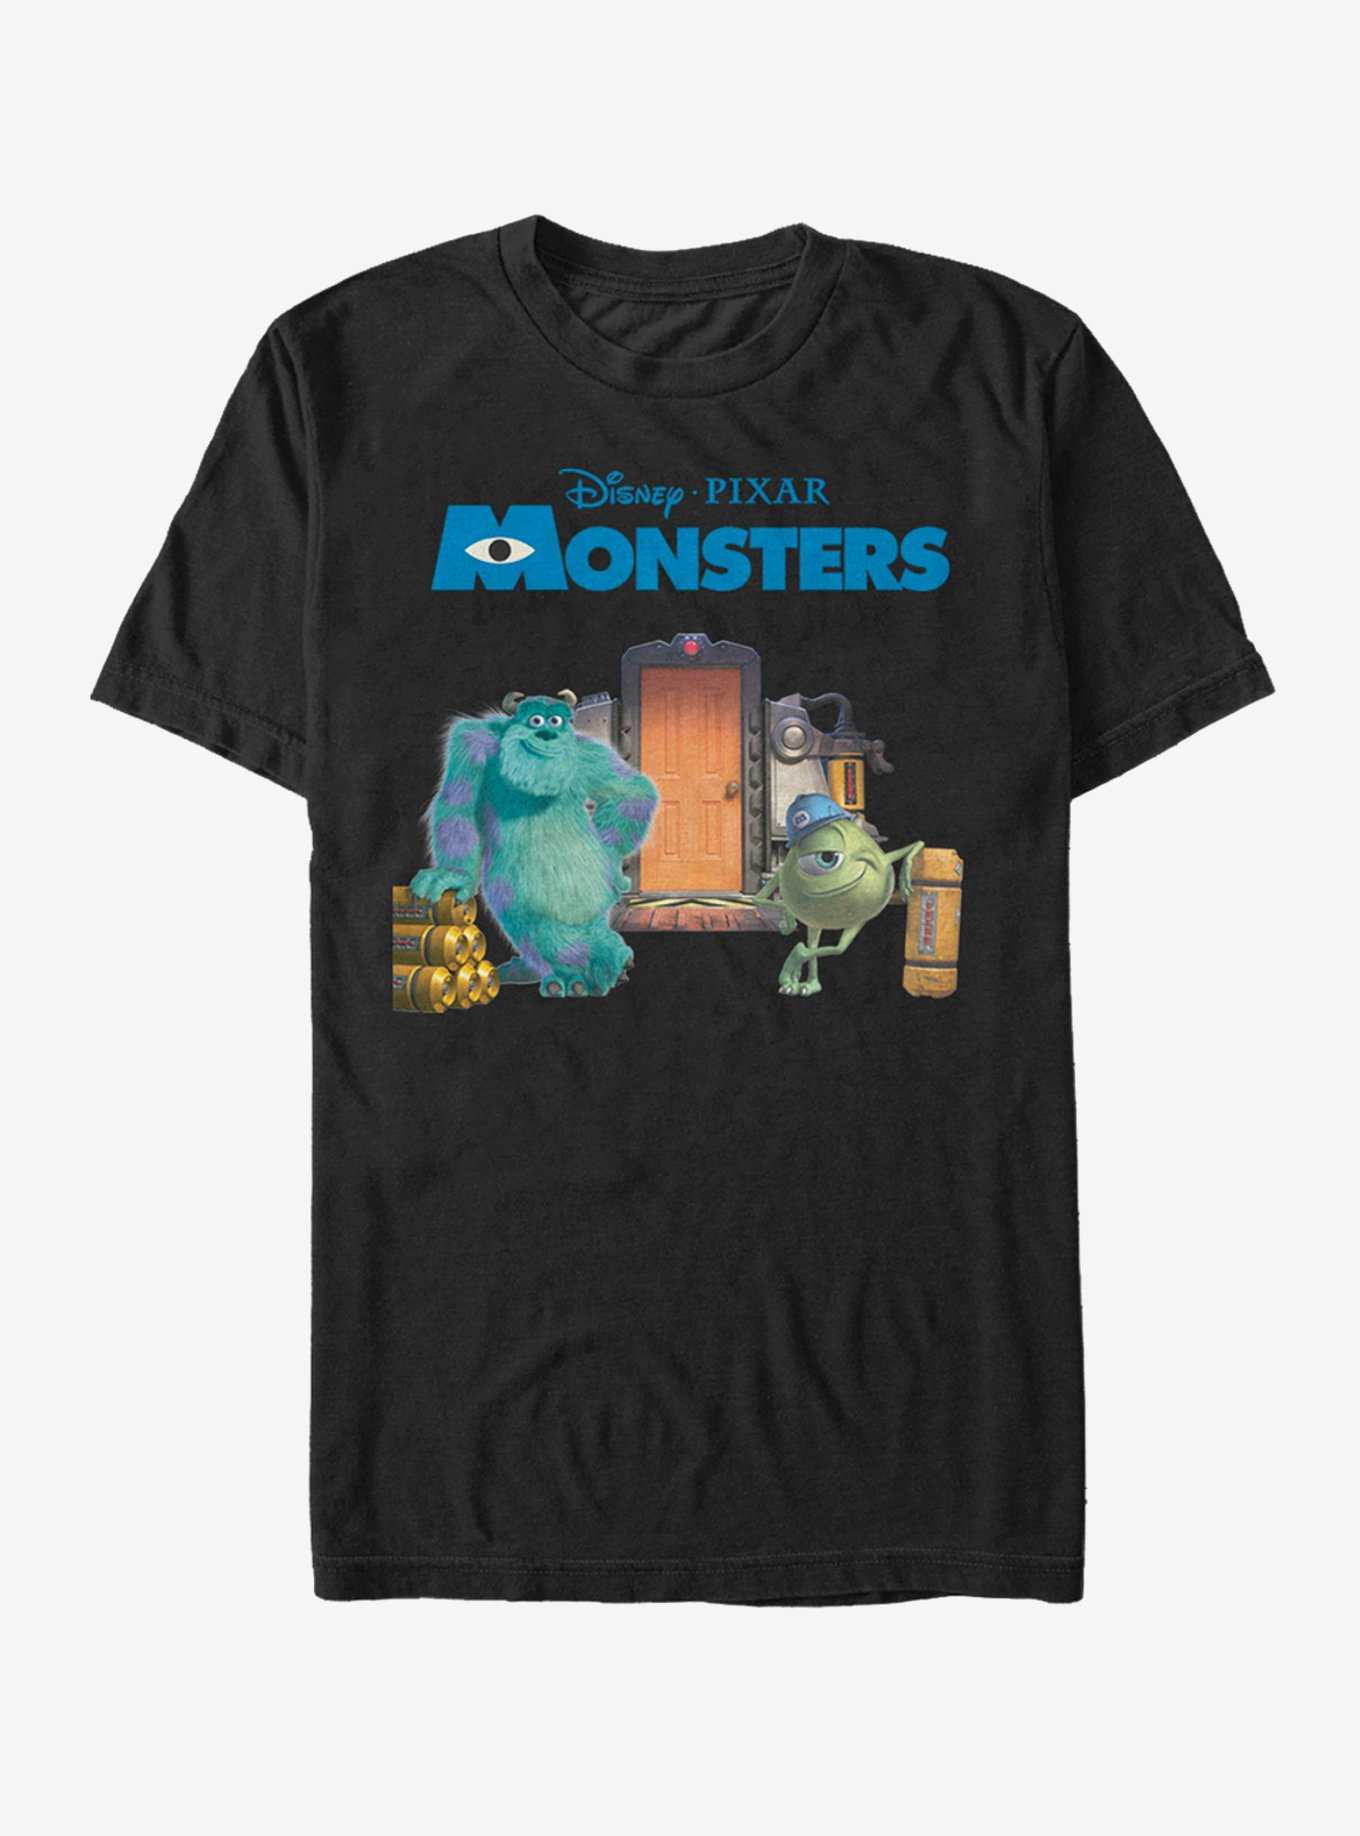 Monsters Inc. Mike and Sulley Scream Factory T-Shirt, , hi-res